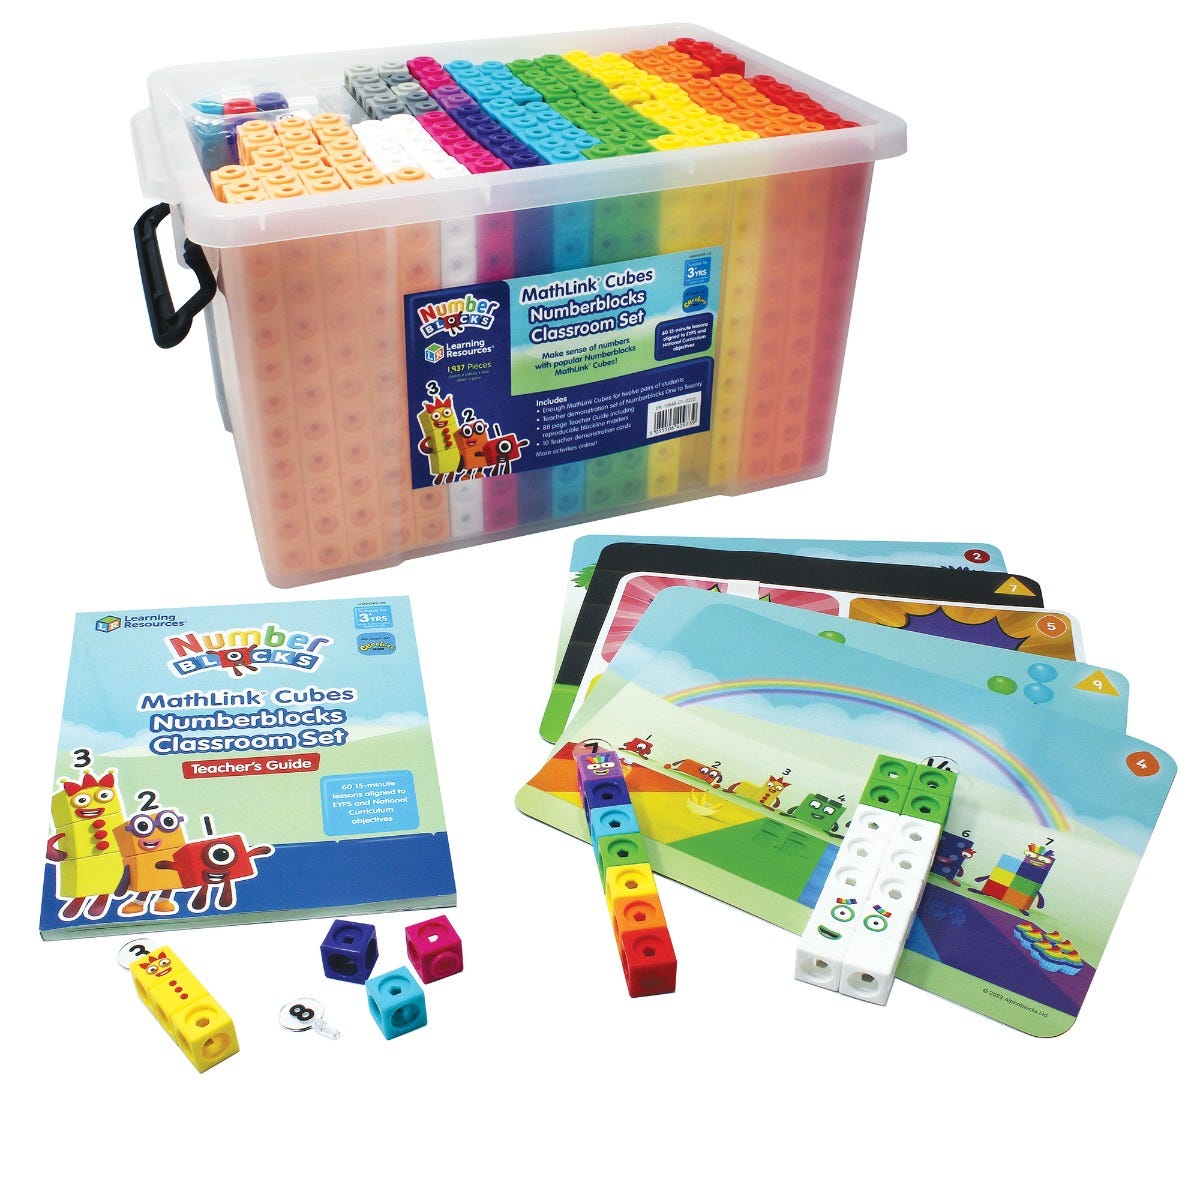 Mathlink Cubes Numberblocks Classroom Set, This is the ultimate Numberblocks maths resources set developed to help teachers bring the maths concepts seen in the award-winning CBeebies TV series to life in the classroom. The Mathlink Cubes Numberblocks Classroom Set includes everything 12 pairs of pupils need to complete the 60 x 15-minute maths learning activities included in the comprehensive 88-page Teacher’s Guide. Activities align with the EYFS and National Curriculum objectives. The ultimate set for te